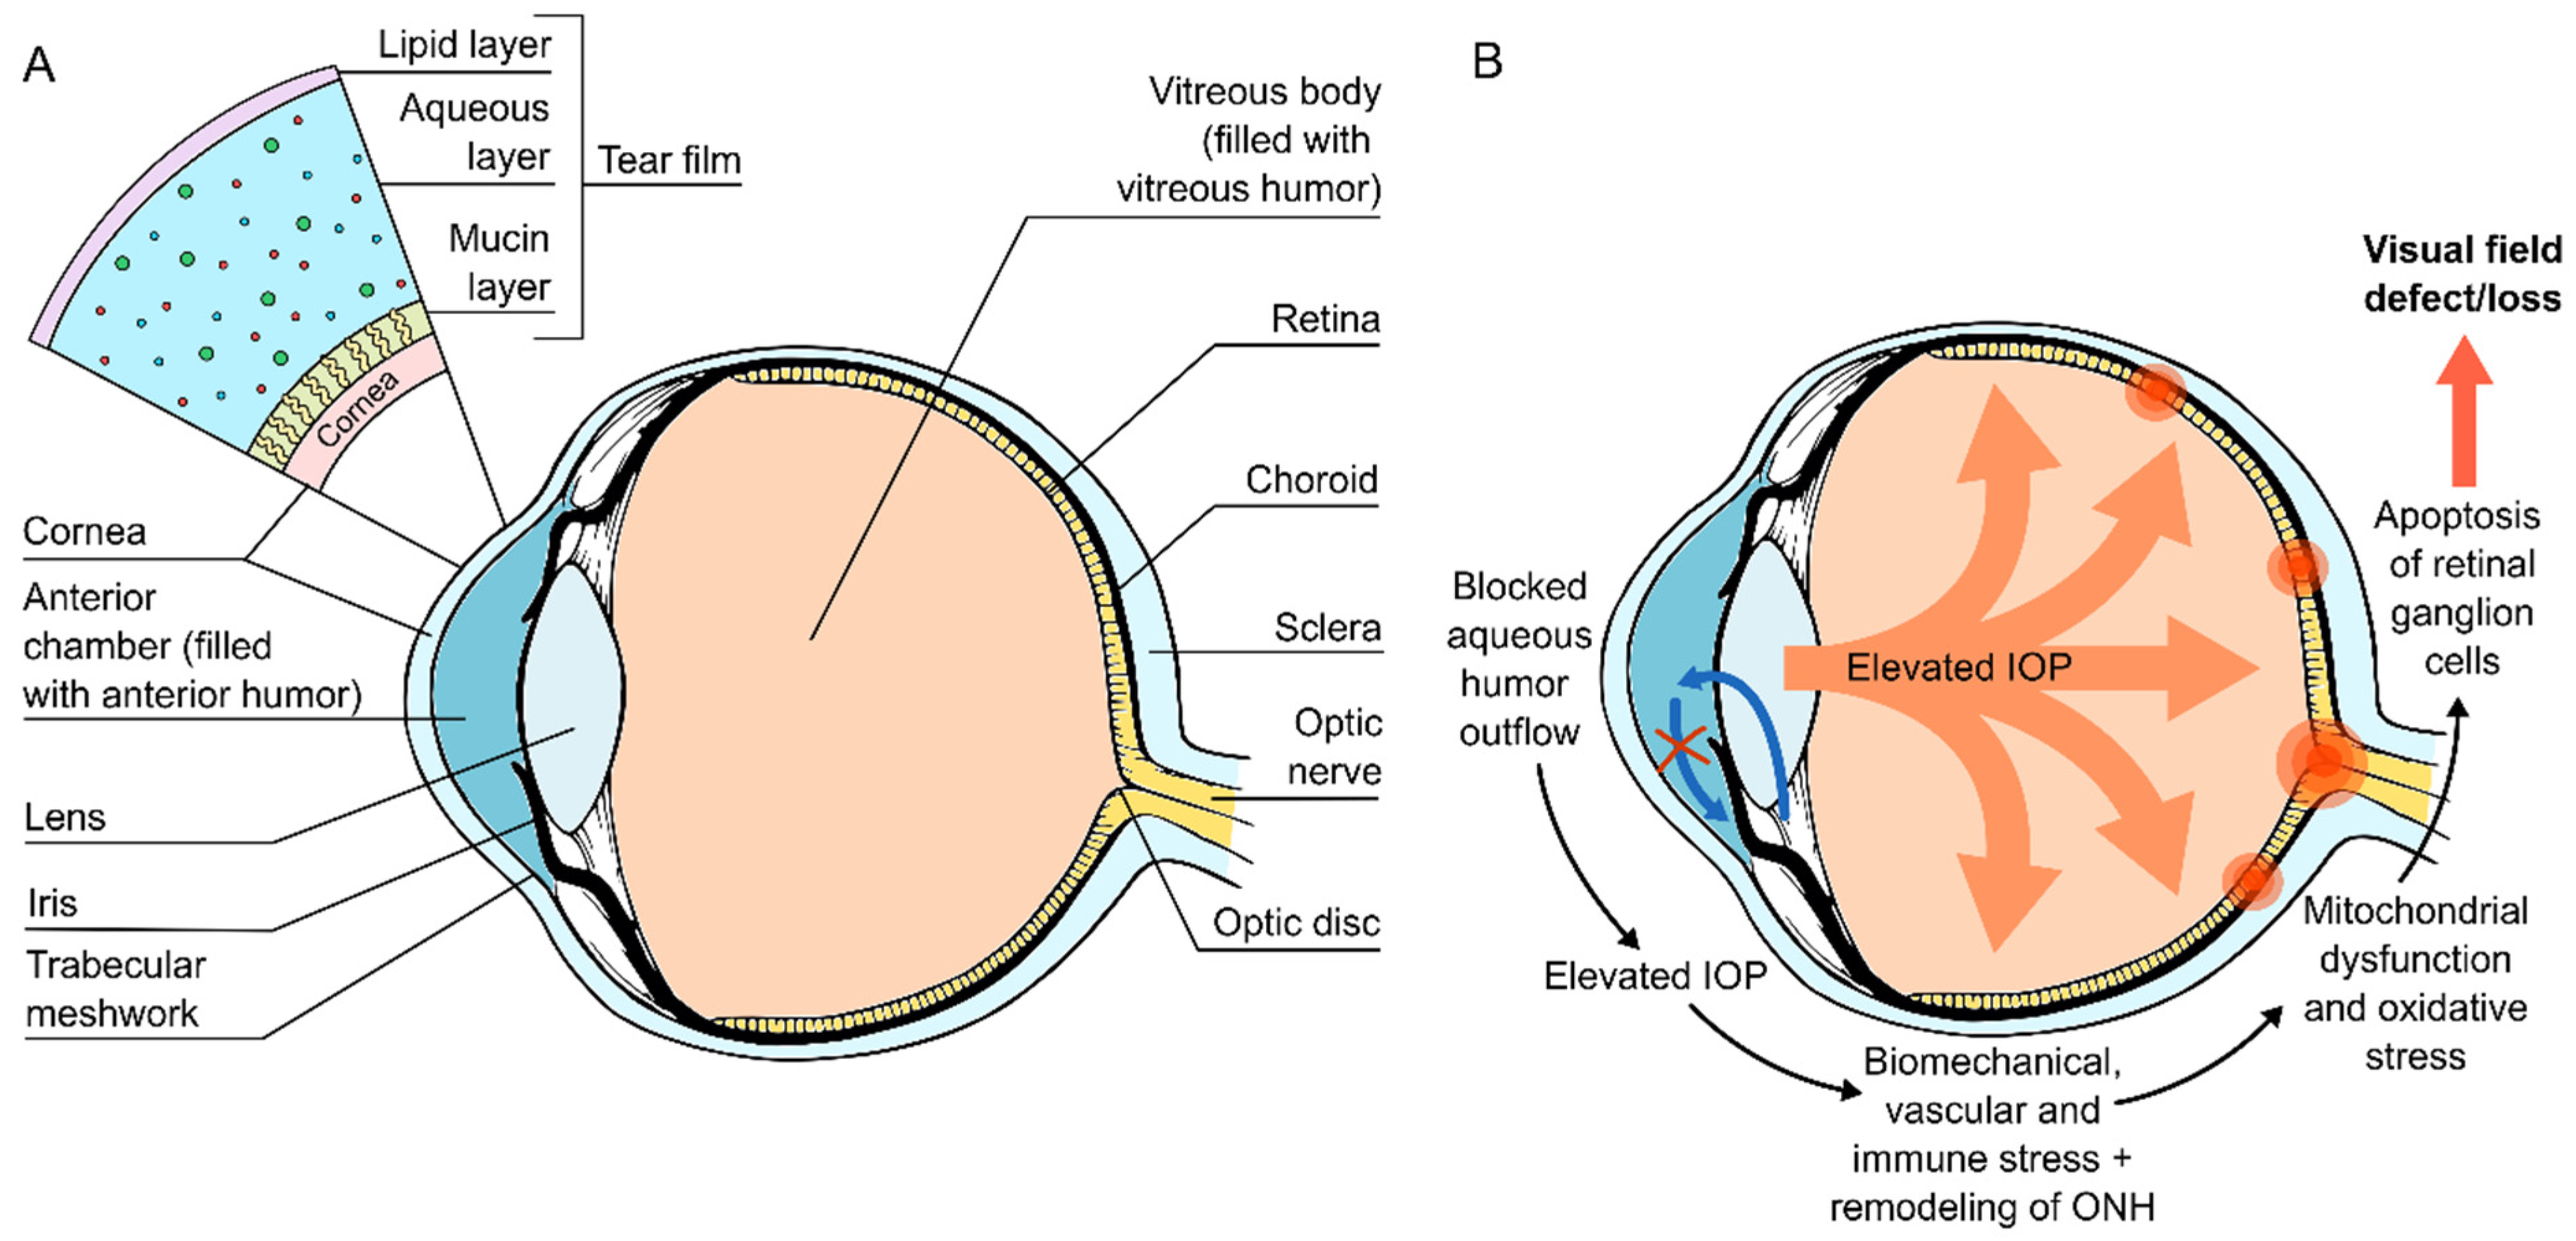 Investigation of intraocular pressure of the anterior chamber and